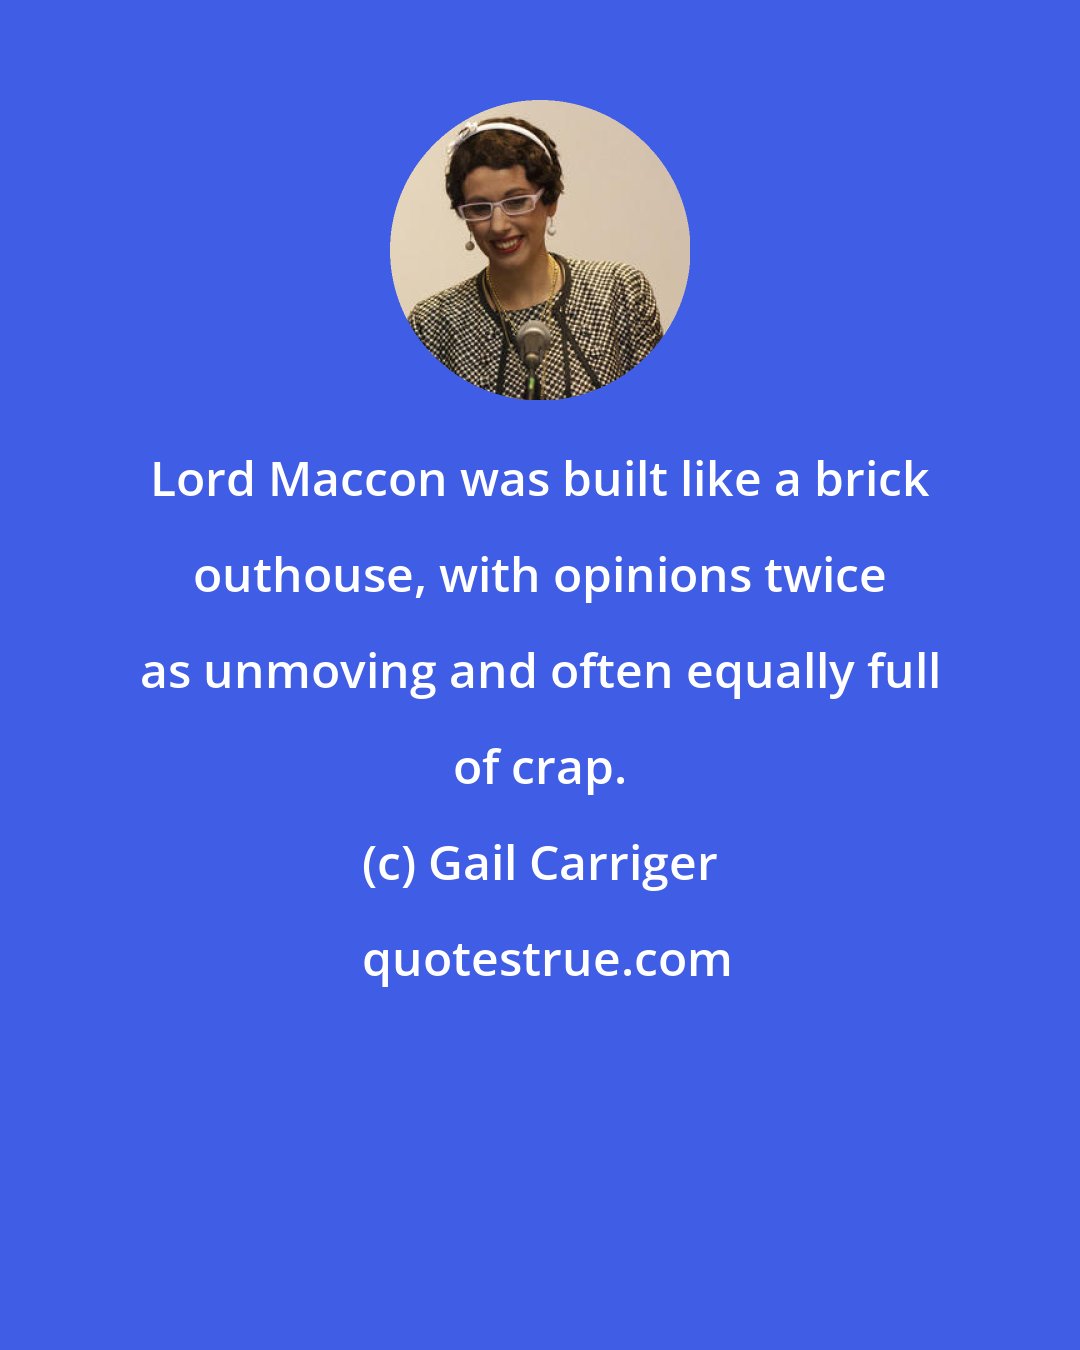 Gail Carriger: Lord Maccon was built like a brick outhouse, with opinions twice as unmoving and often equally full of crap.